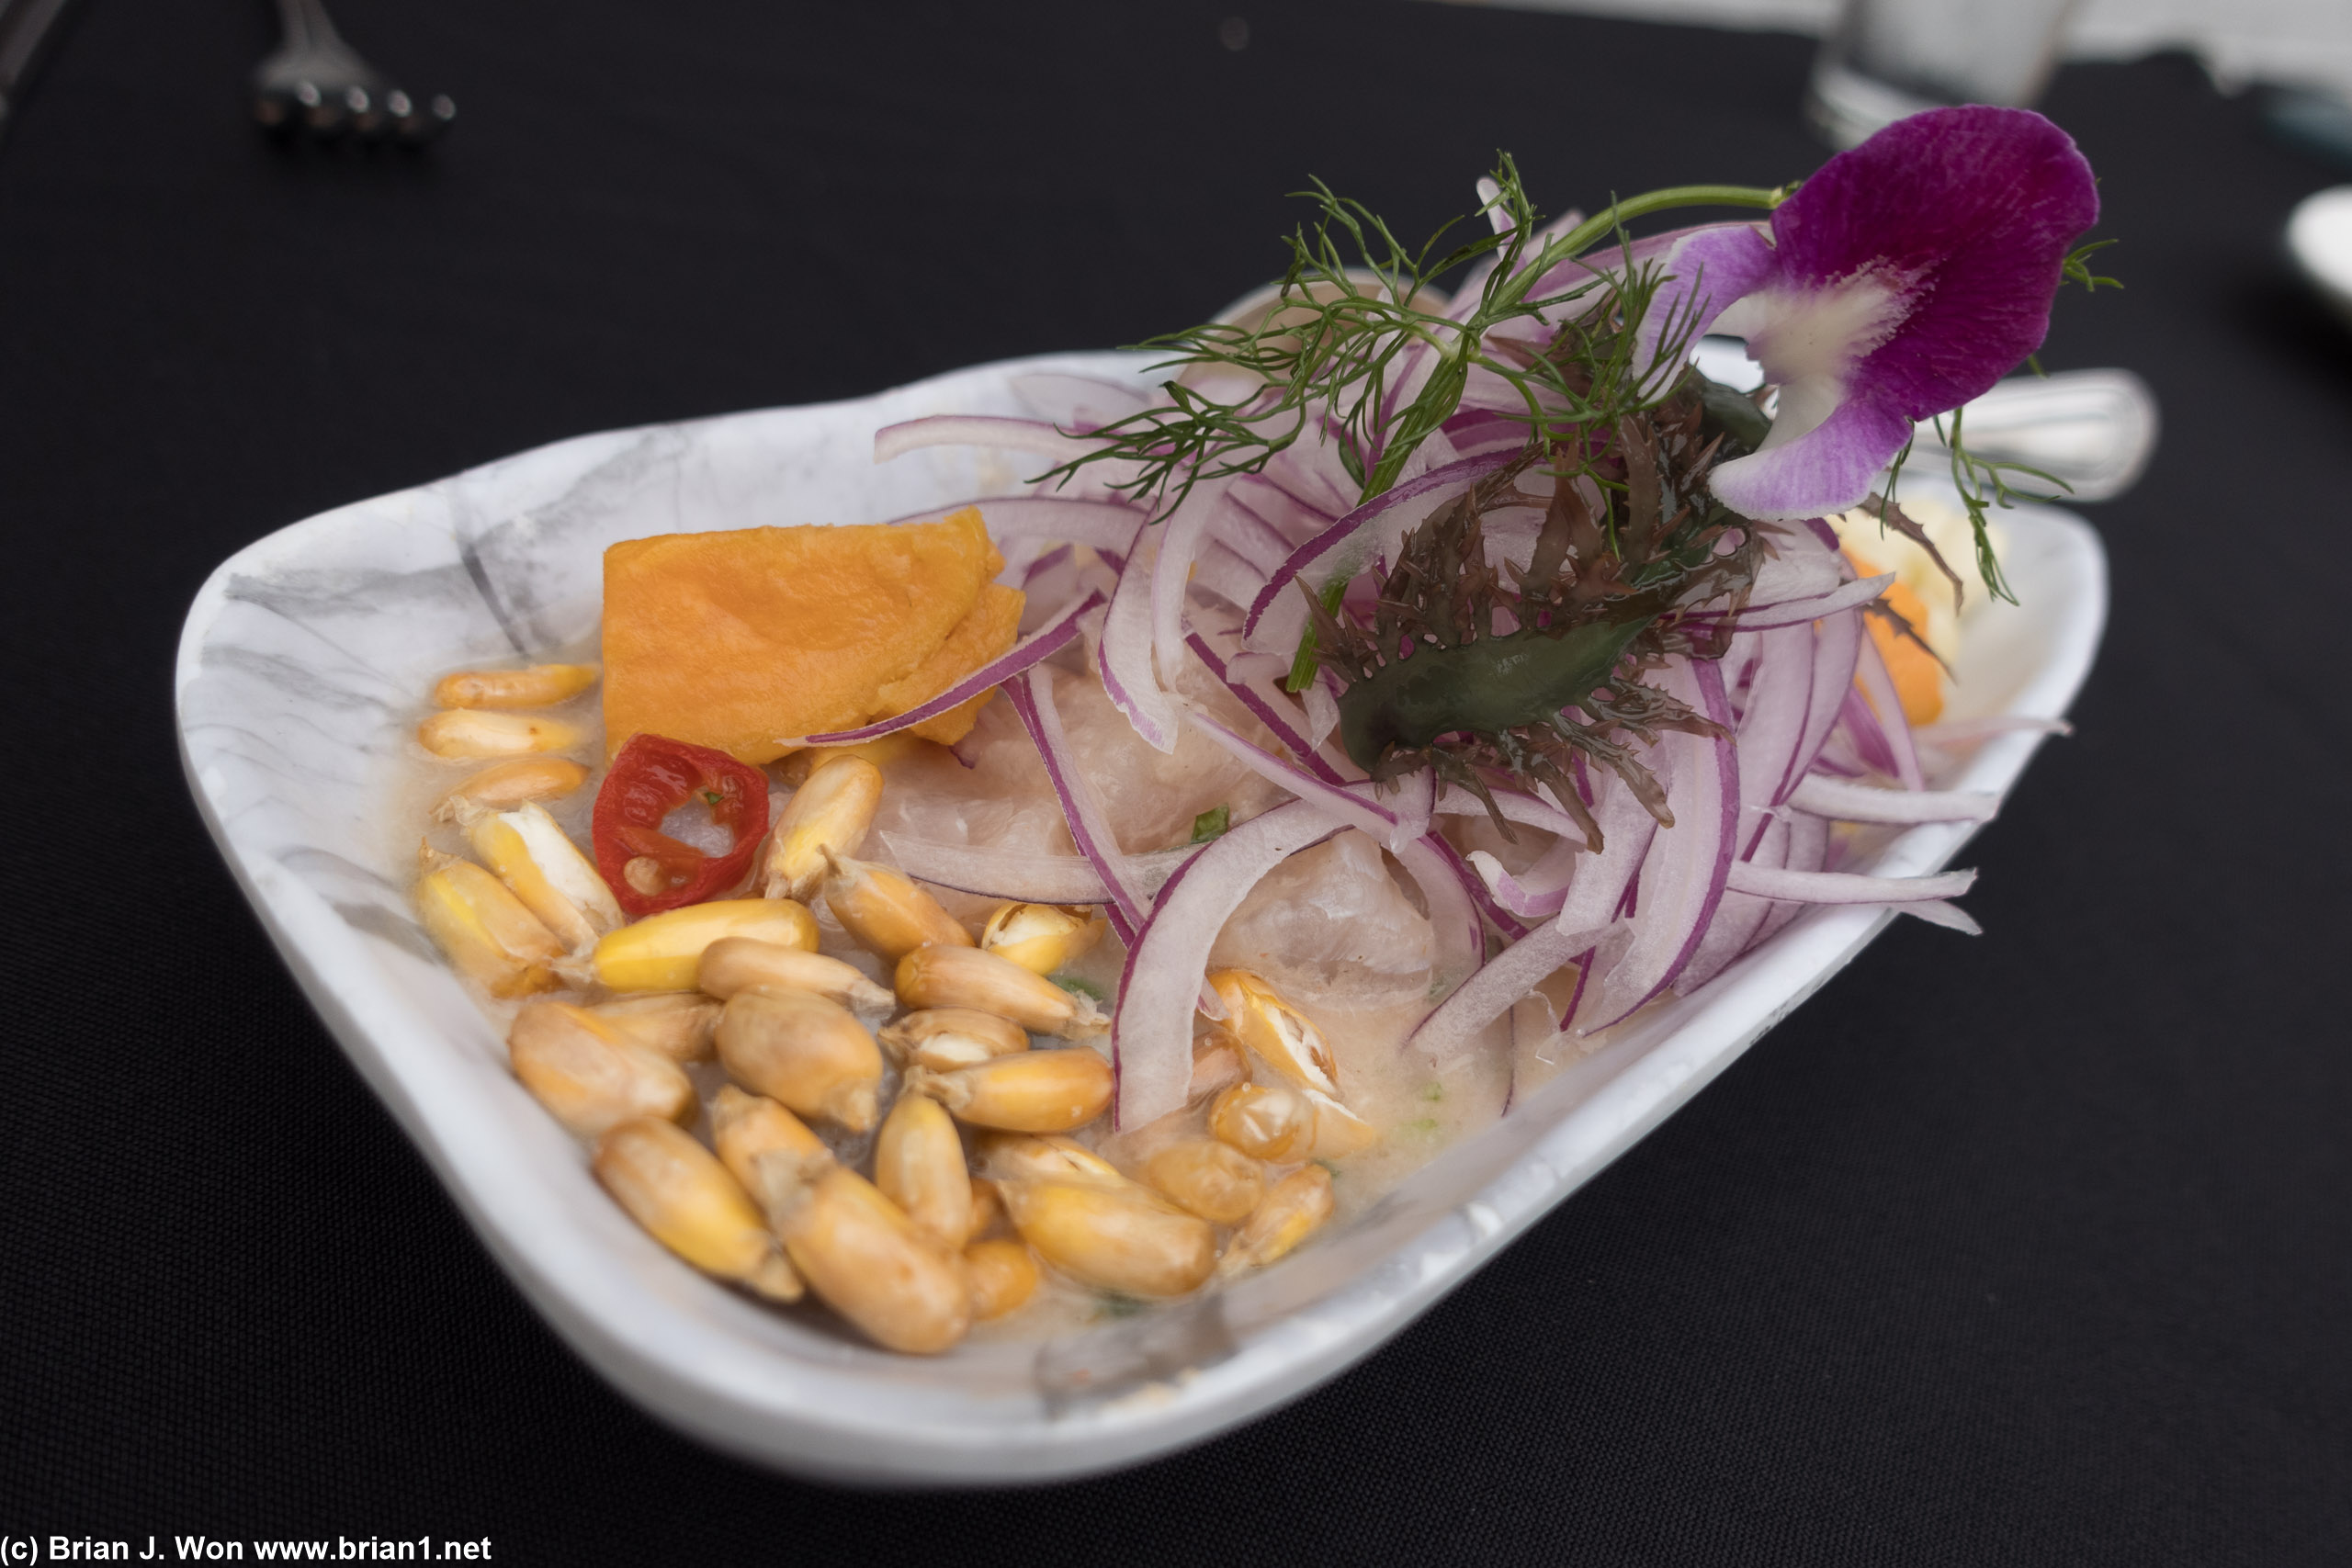 Fisherman ceviche is always good here.